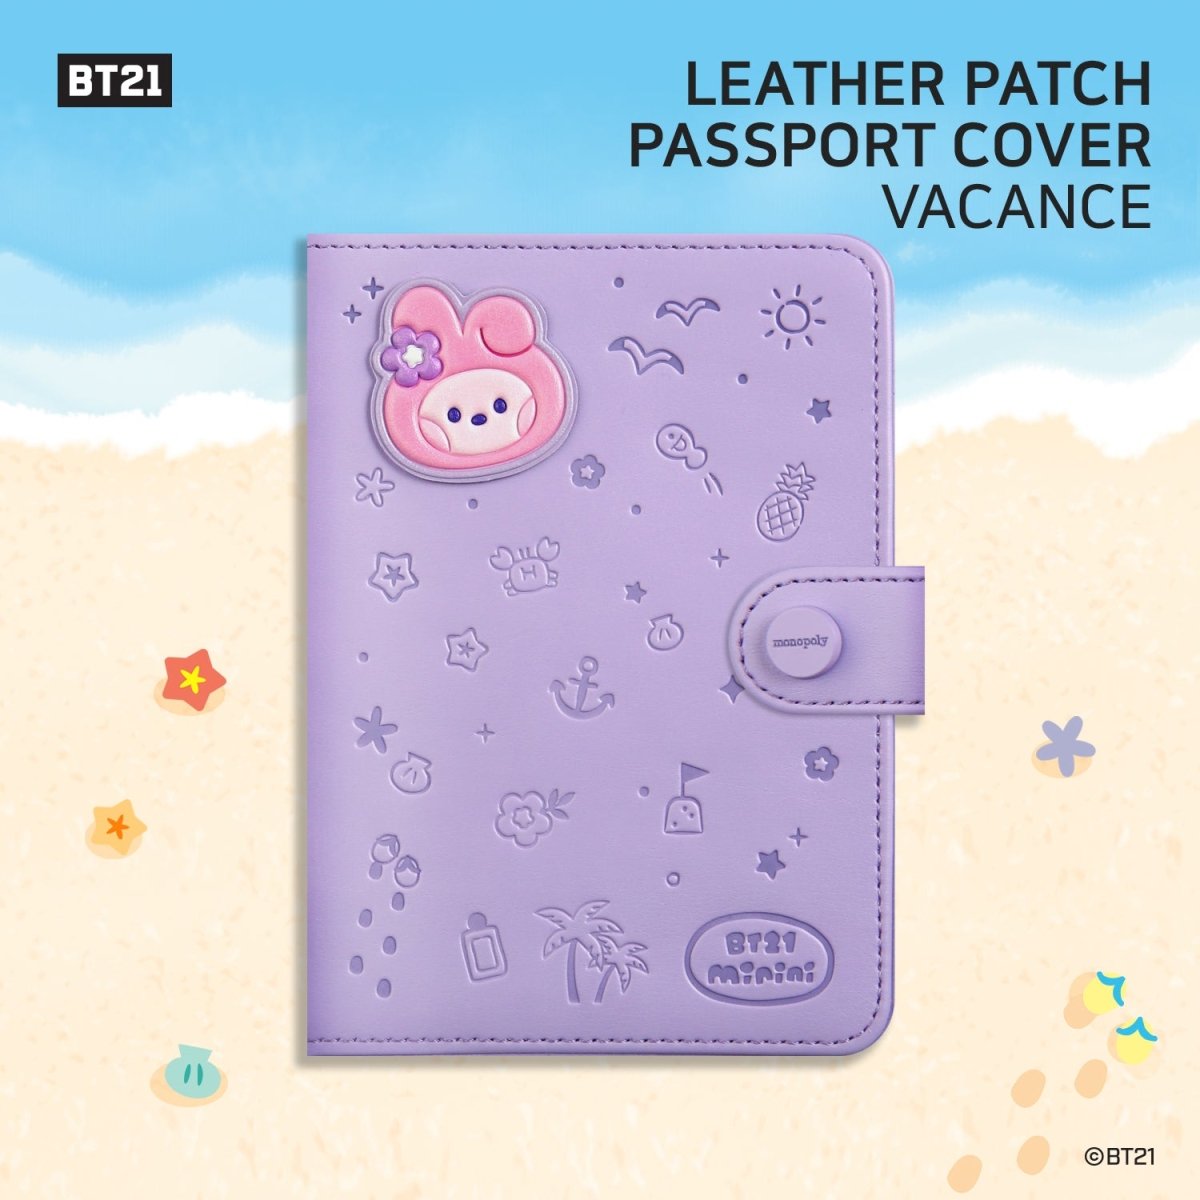 BT21 Minini Official Leather Patch Passport Case Vacance Ver. – K-STAR